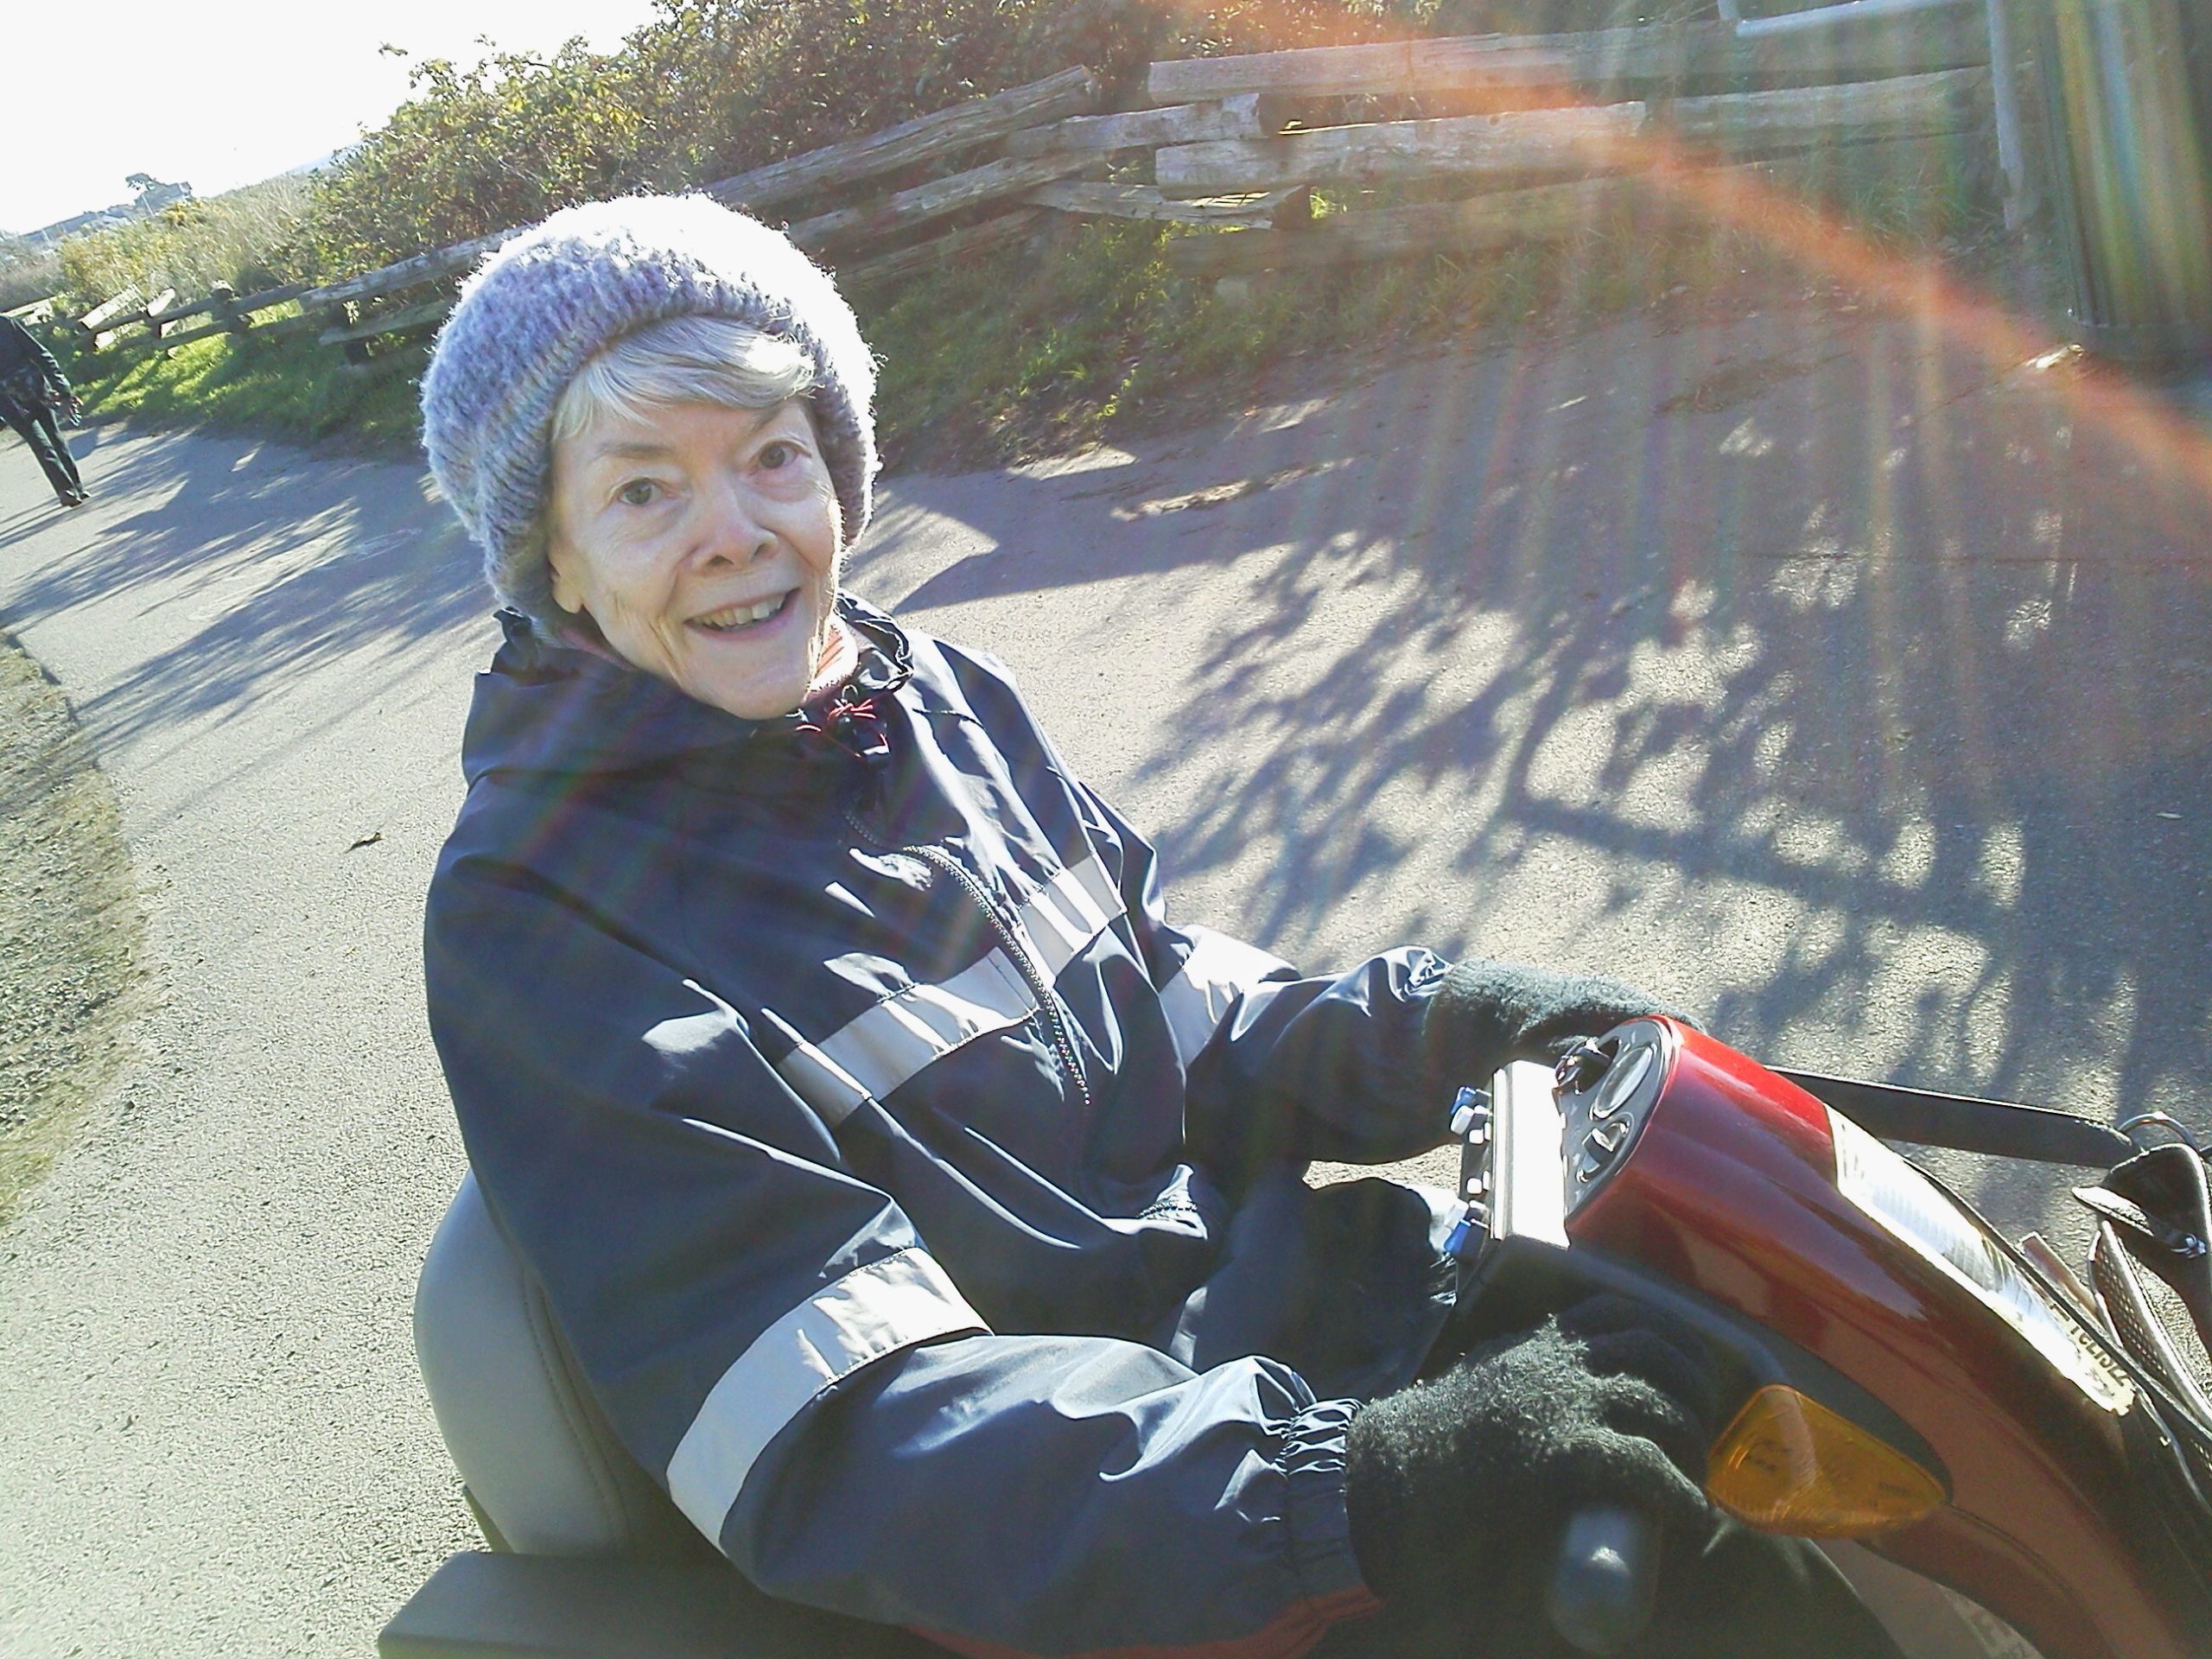 Frances on her scooter in 2014